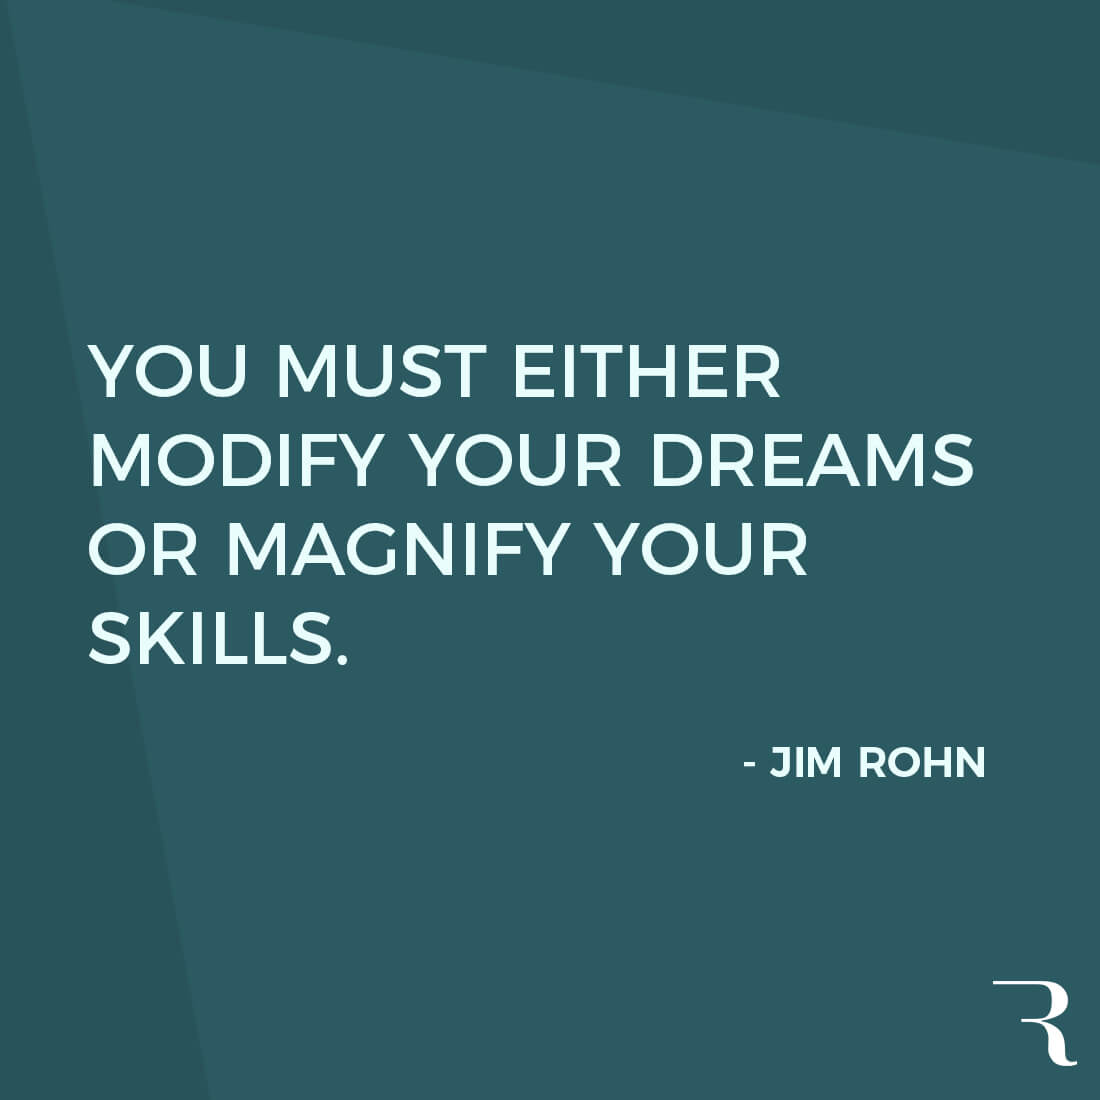 Motivational Quotes: “You must either modify your dreams or magnify your skills.” 112 Motivational Quotes to Be a Better Entrepreneur